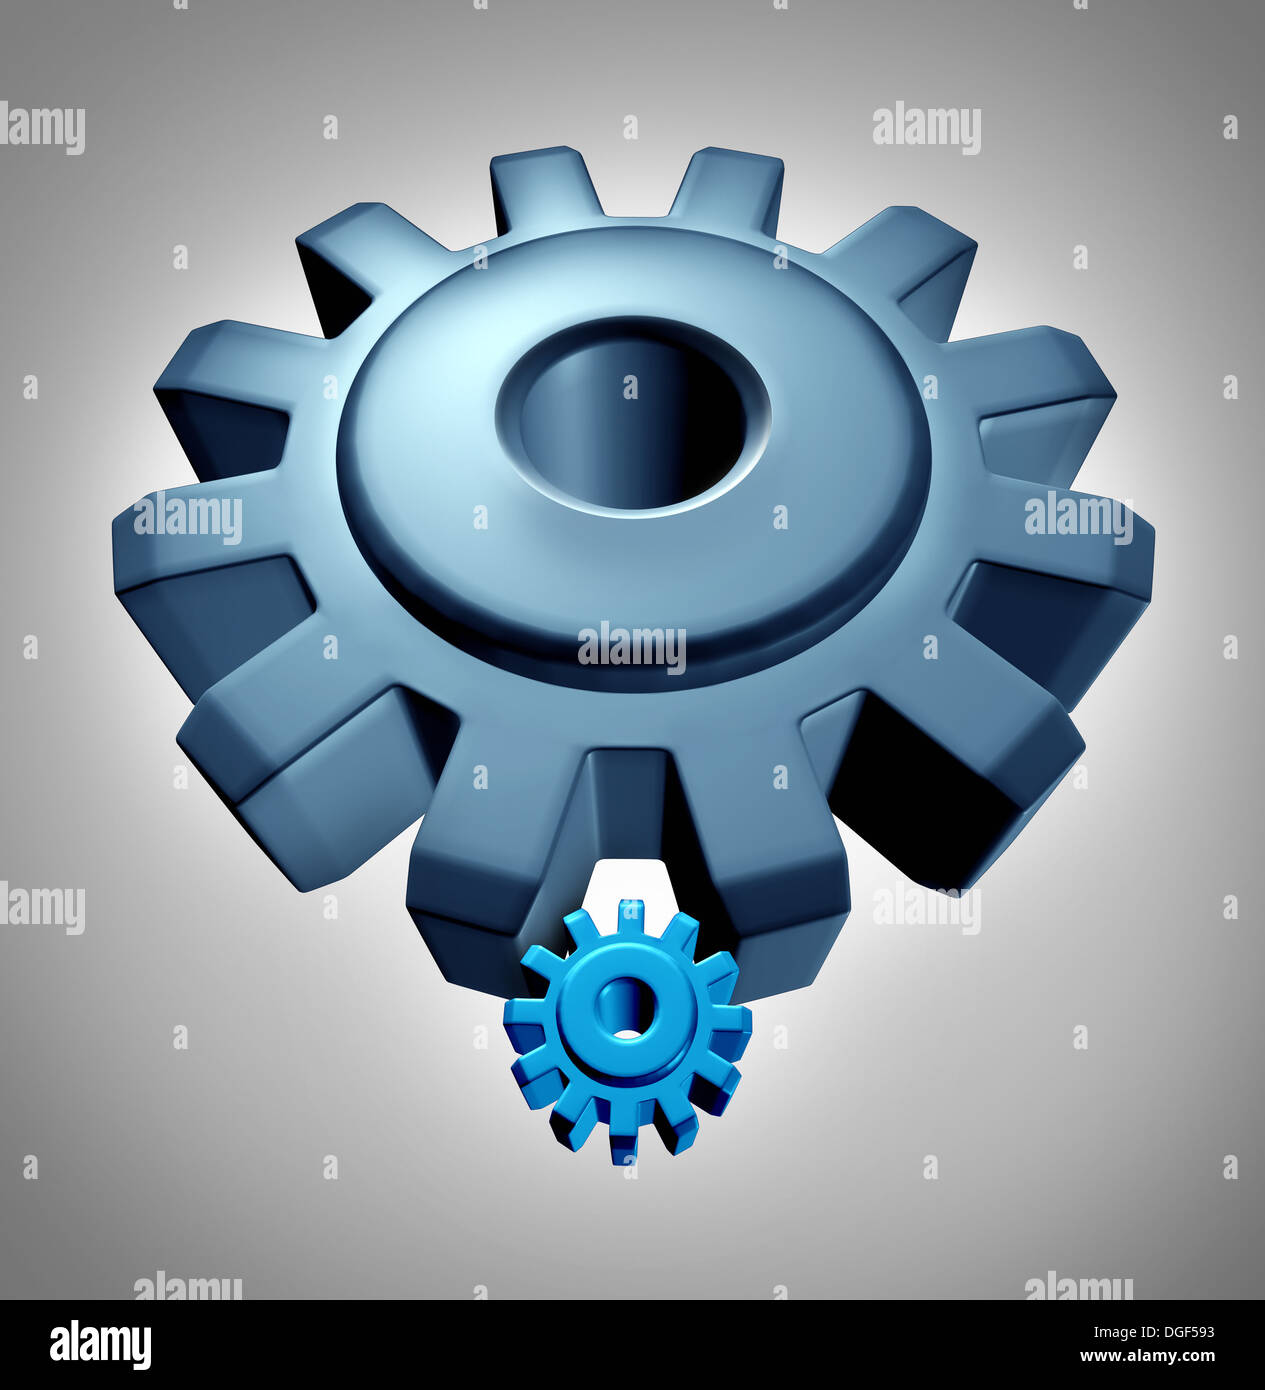 Young leader or apprentice business technology concept with a symbol of an older experienced giant gear or cog teaching a small Stock Photo